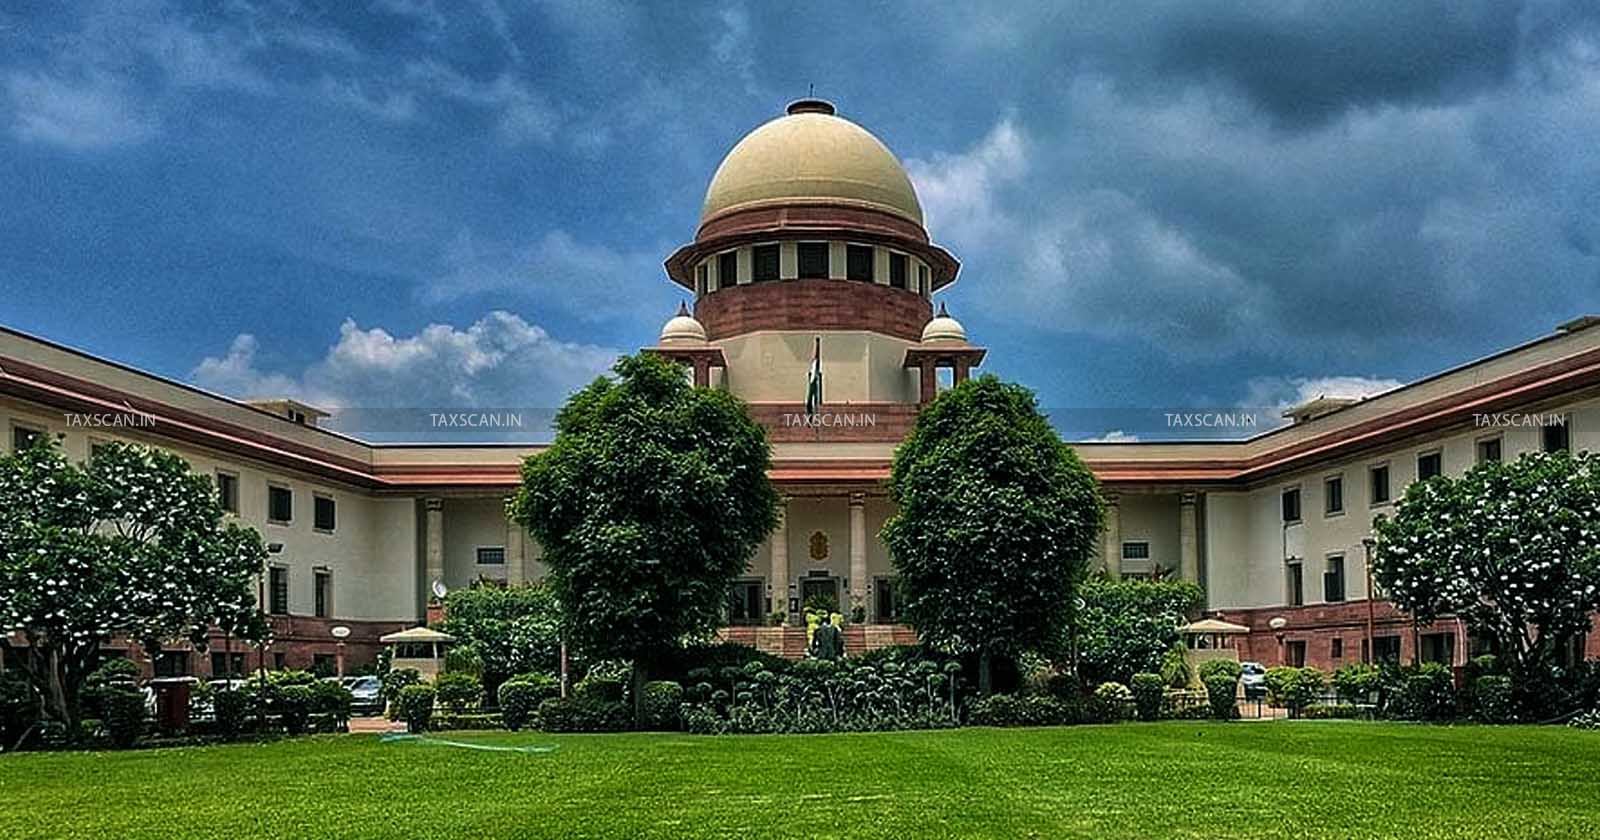 Special Leave Petition - Filing Special Leave Petition - Income Tax Appeal - Supreme Court - SC - TAXSCAN